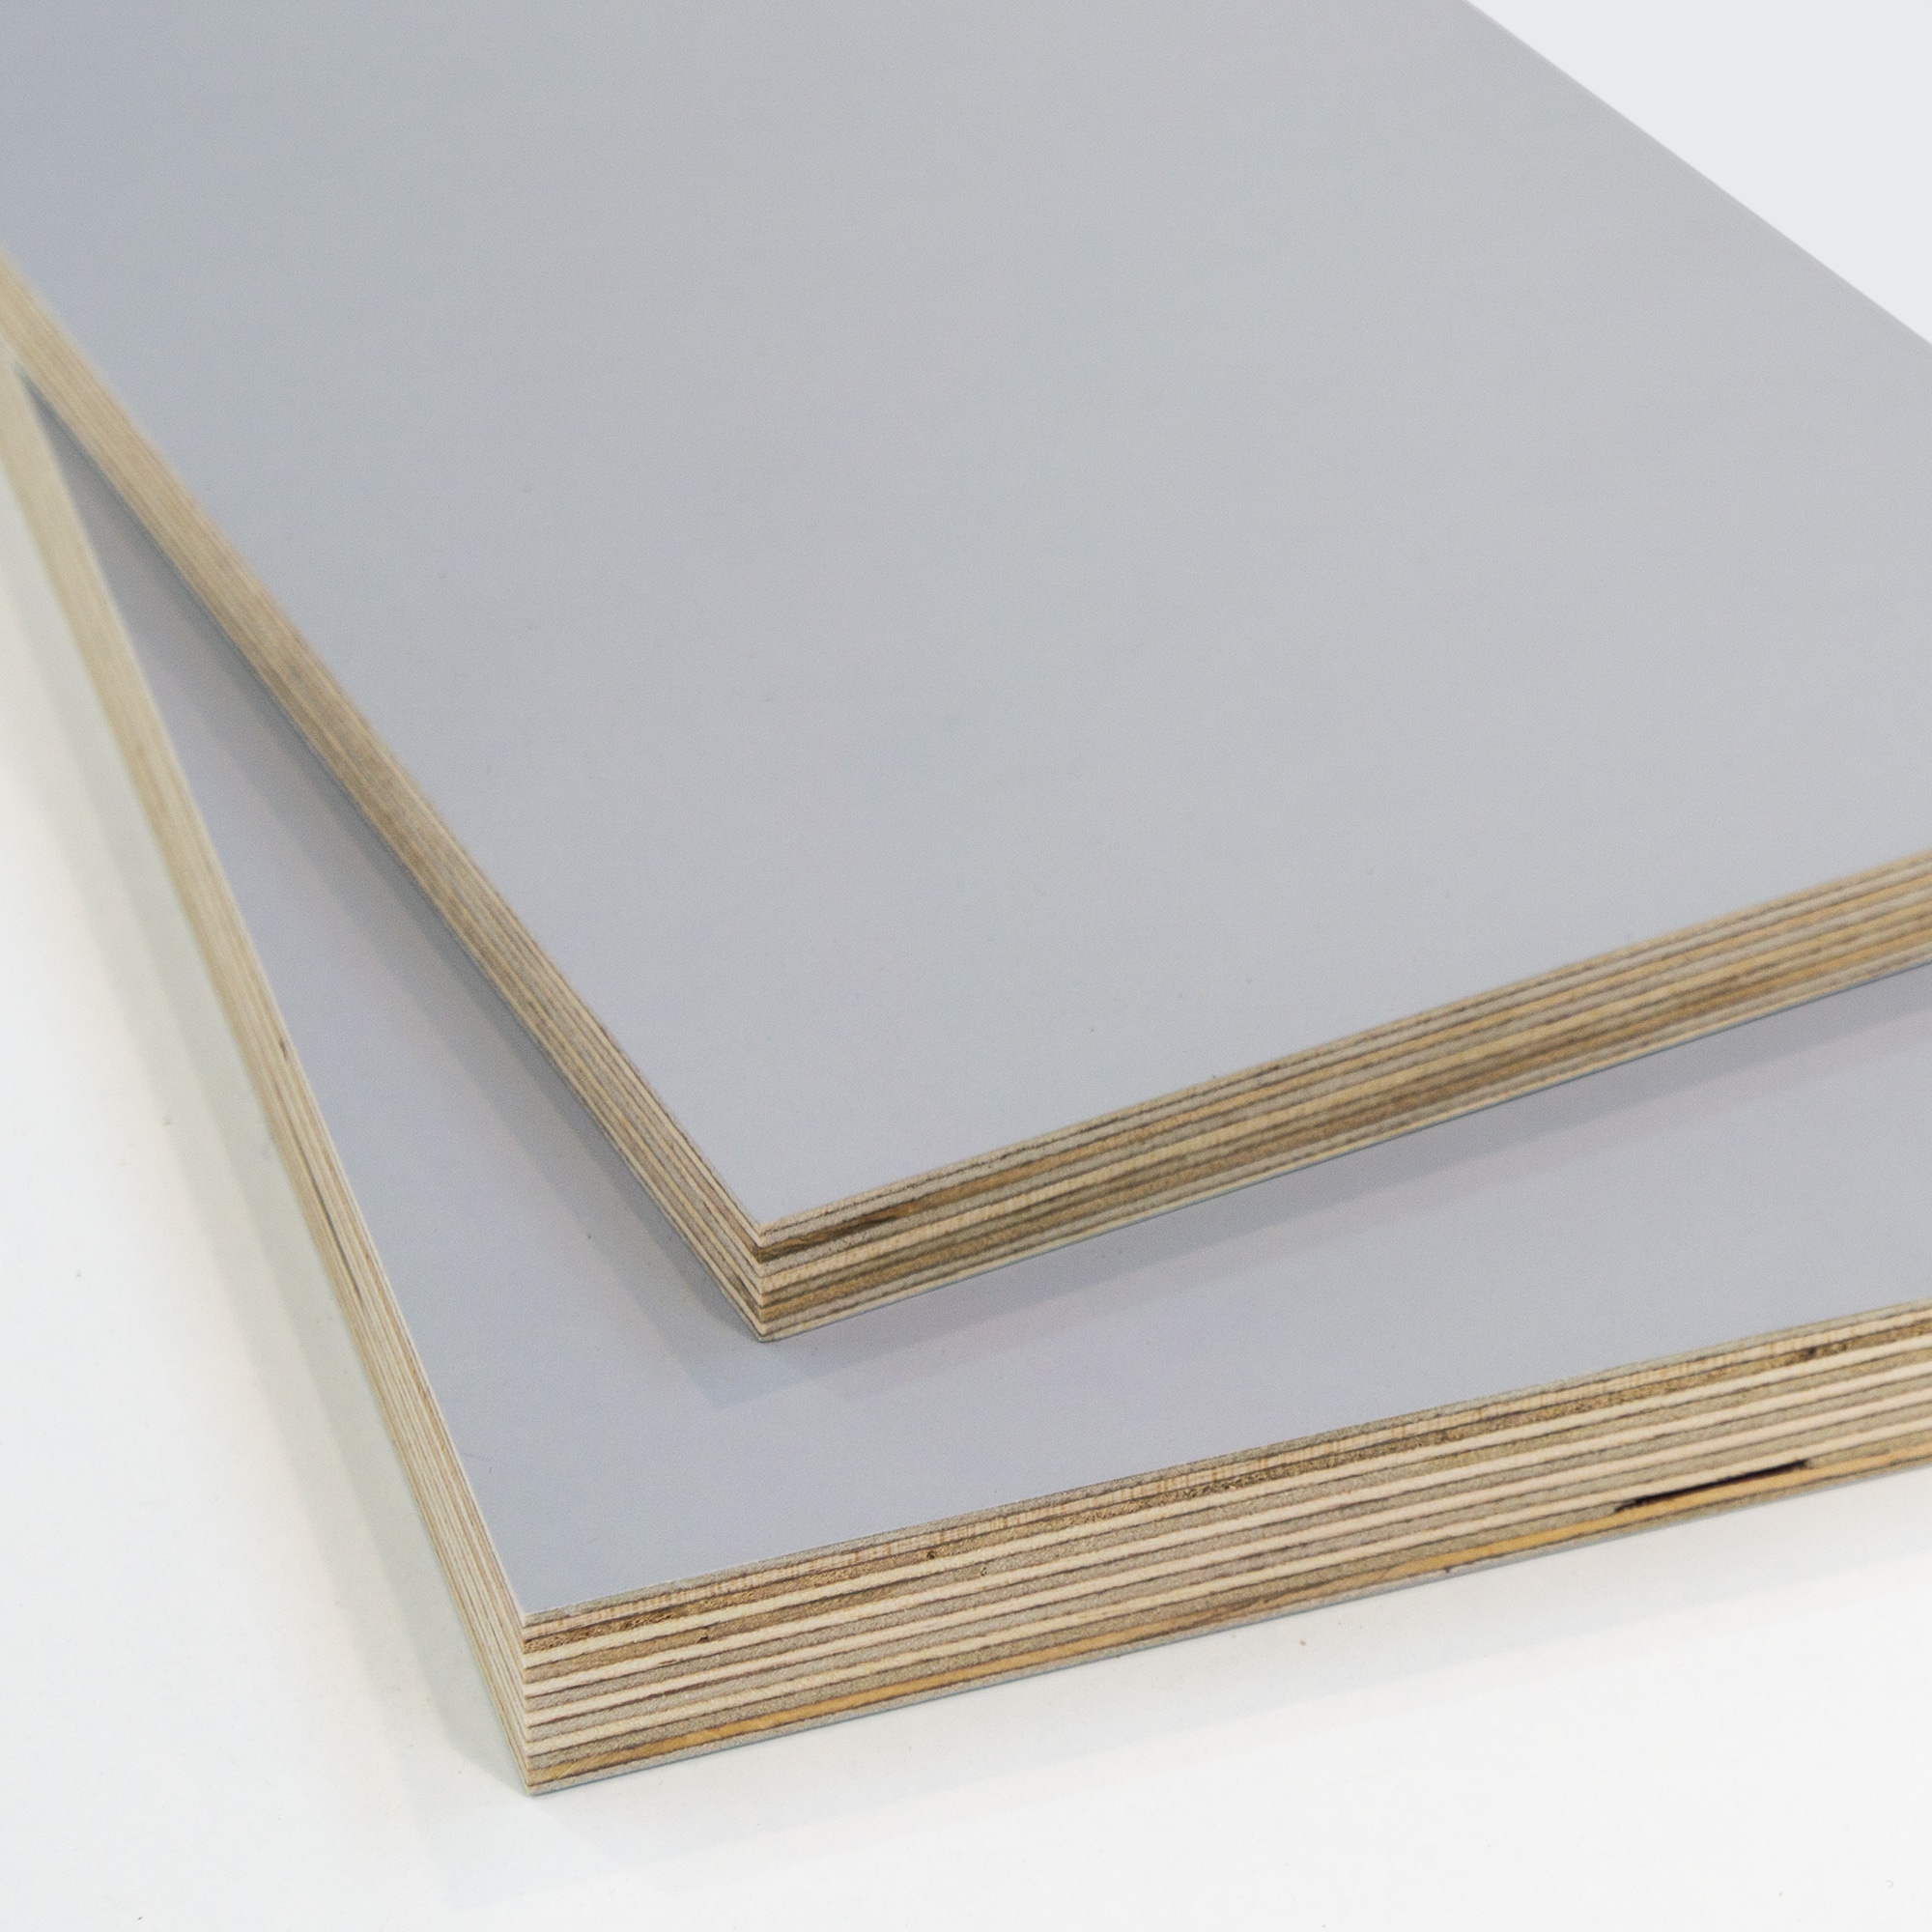 two pieces of grey melamine faced plywood on a white background